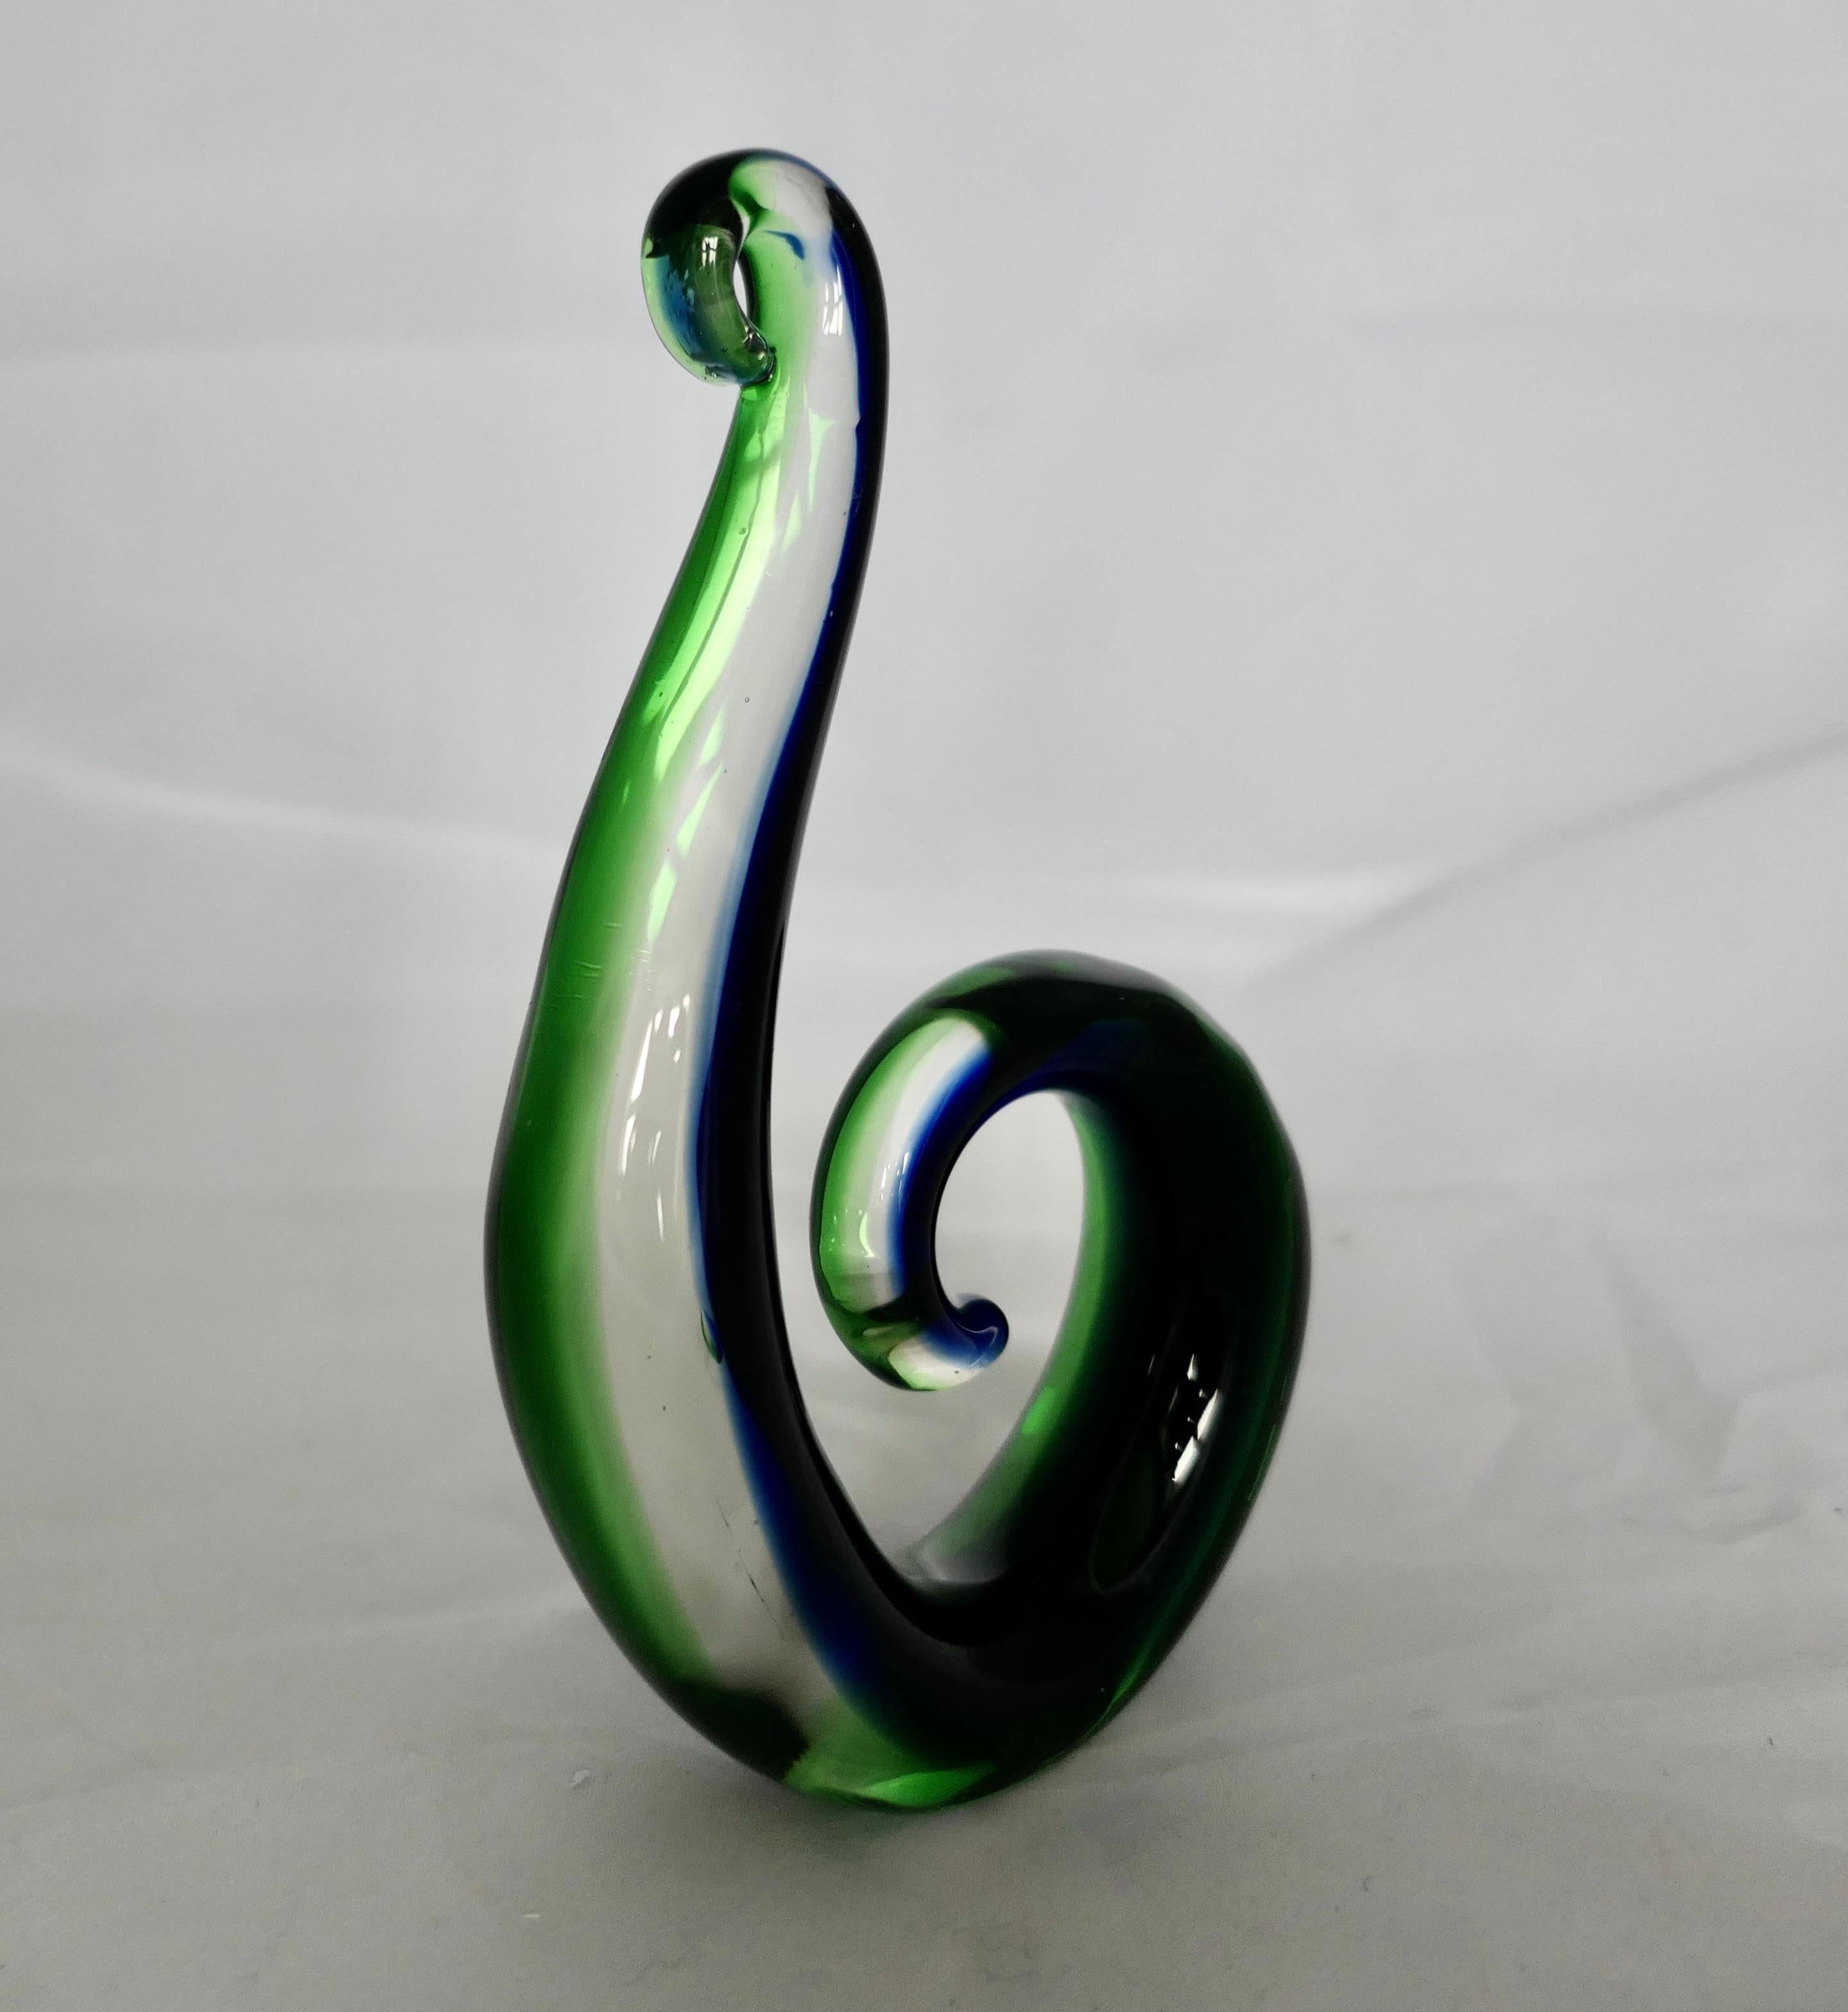 Art Glass Vintage Murano Hand Crafted Green and Blue Koru  Representing a Fern Frond   For Sale